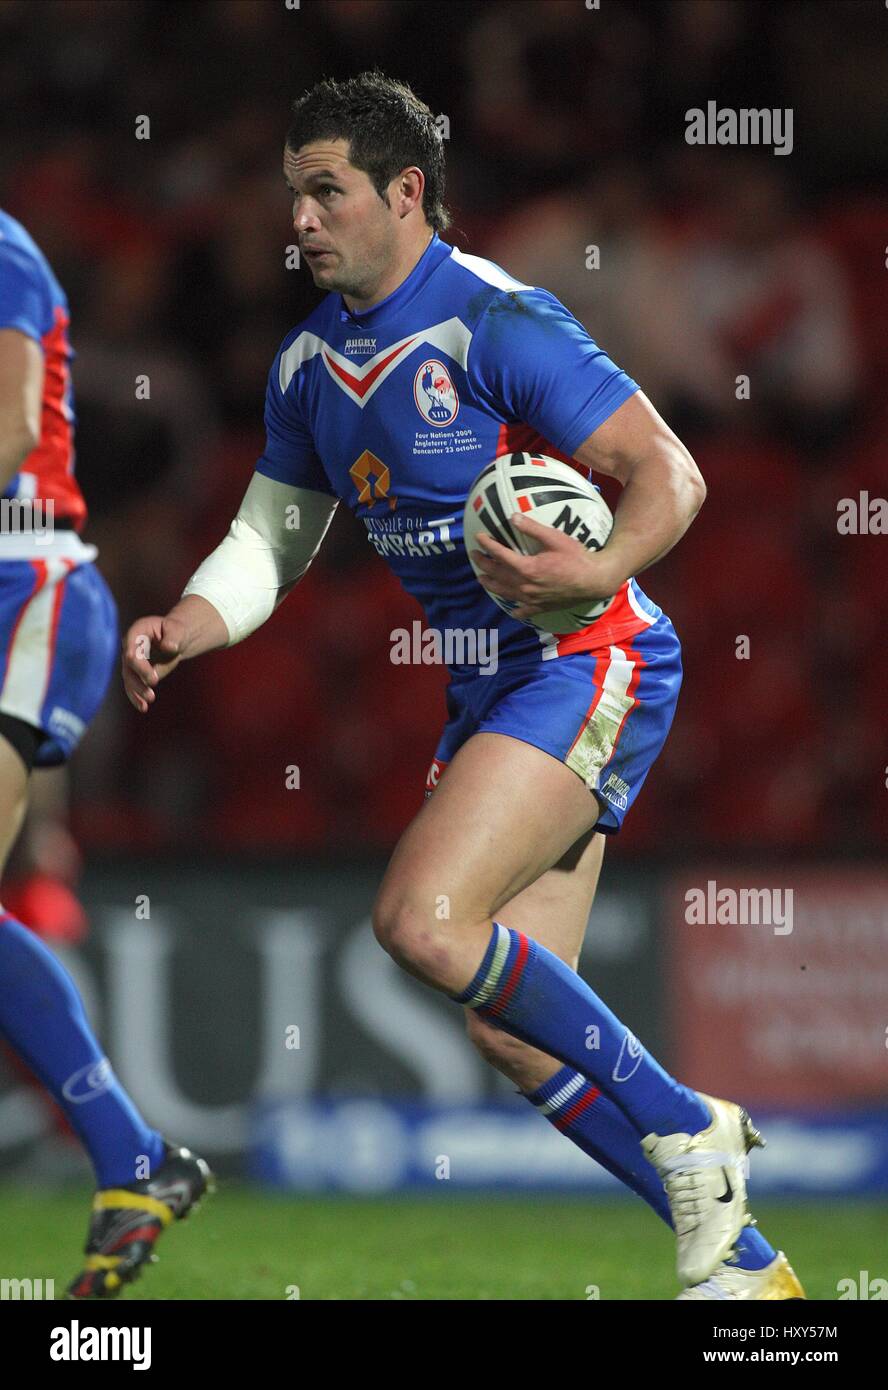 CLINT GREENSHIELDS FRANCE RUGBY LEAGUE KEEPMOAT STADIUM DONCASTER ENGLAND 23 October 2009 Stock Photo